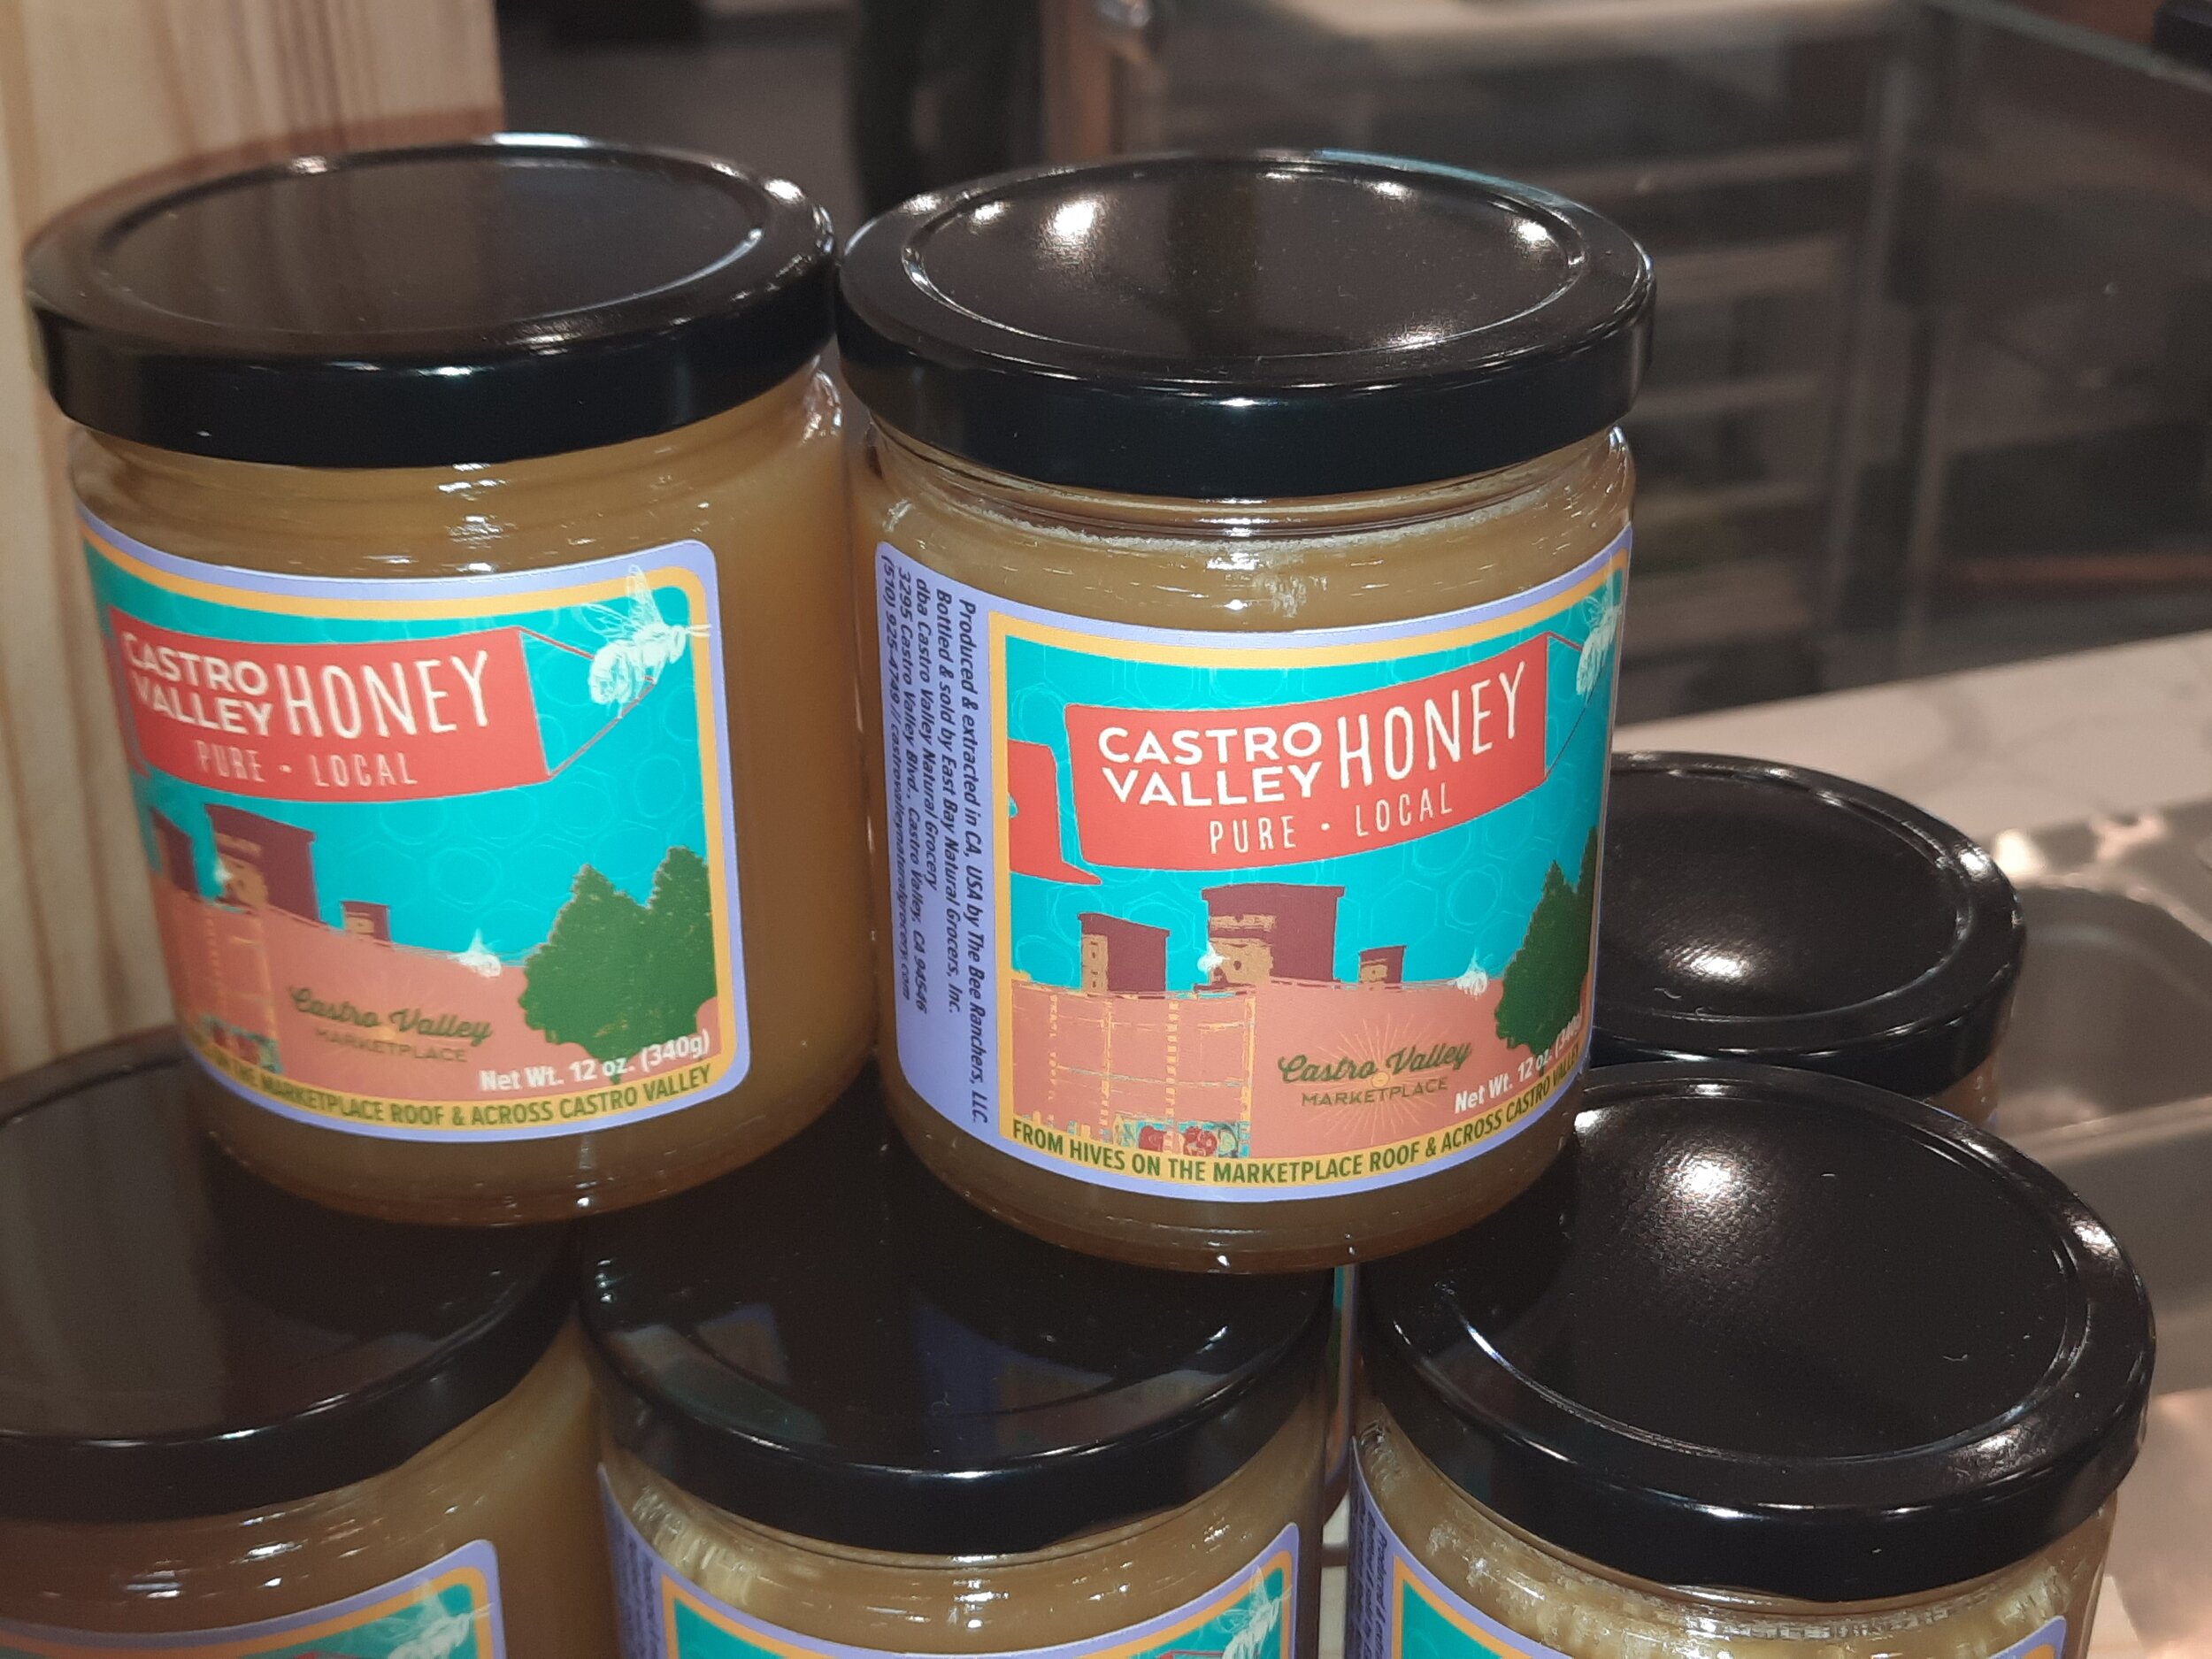  The 8 -ounce jars of locally-made honey are available at Natural Grocery inside Castro Valley Marketplace 